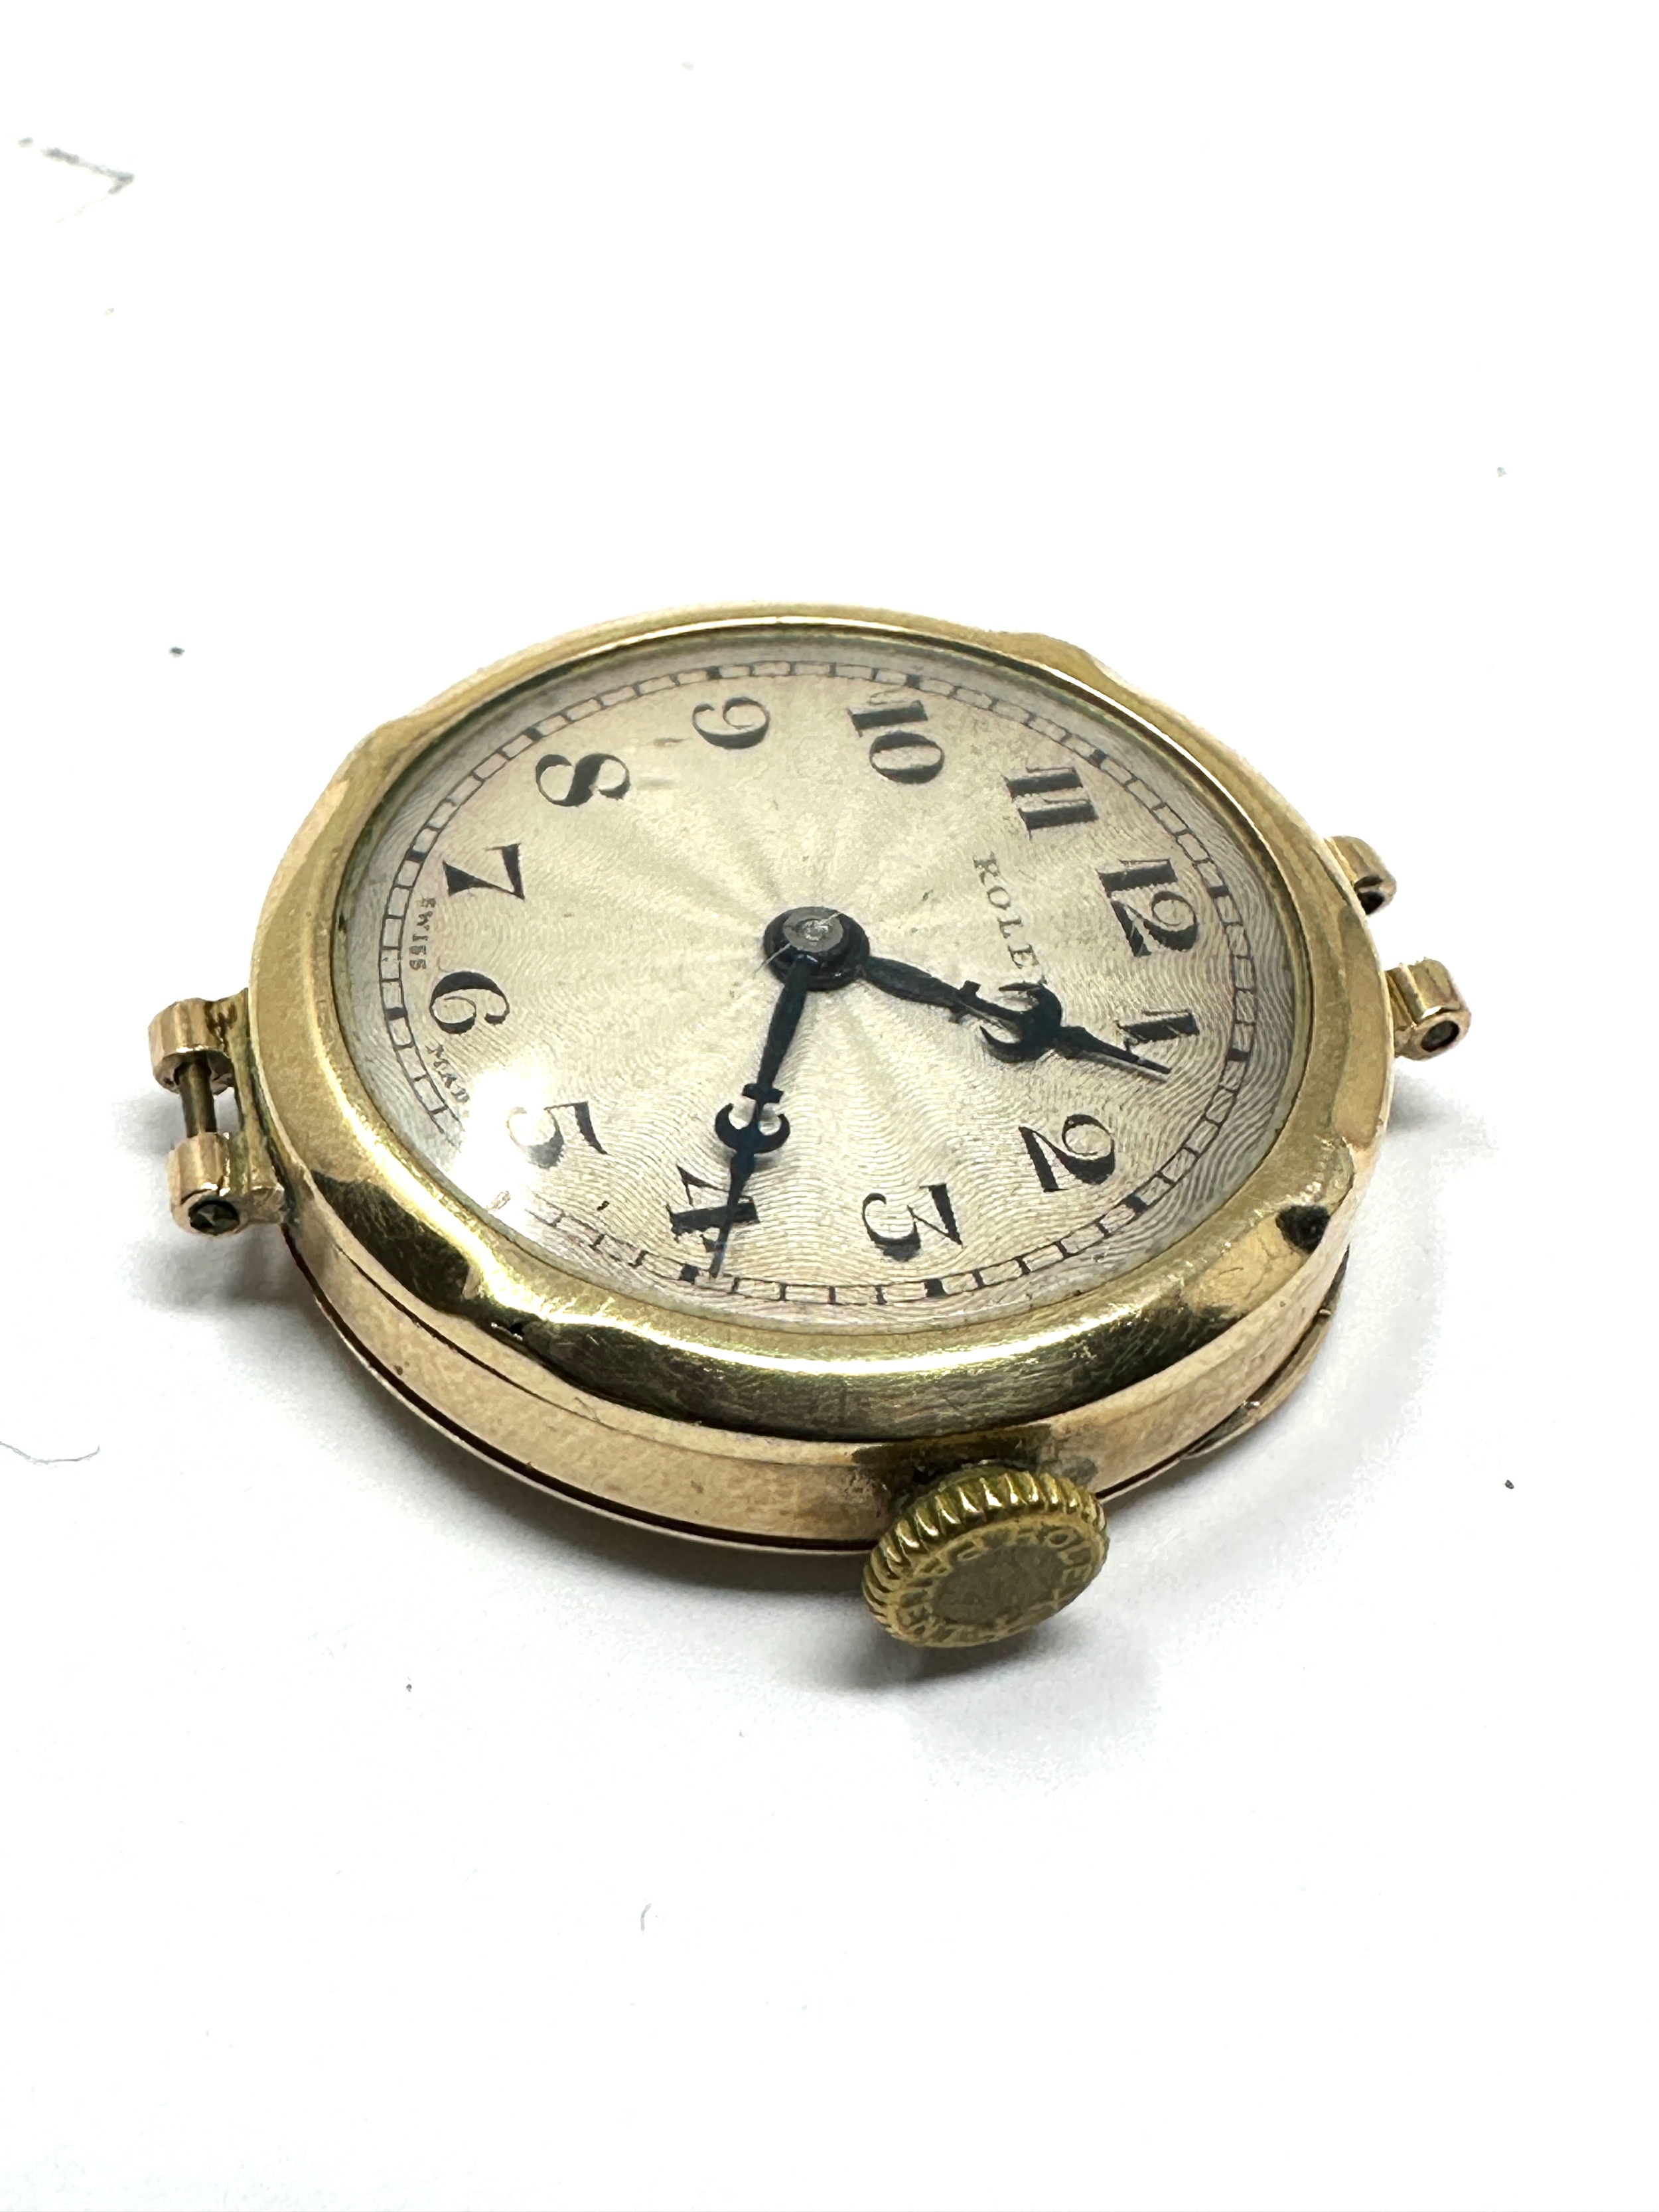 1930s Ladies 9ct gold rolex wristwatch the watch is ticking - Image 2 of 5